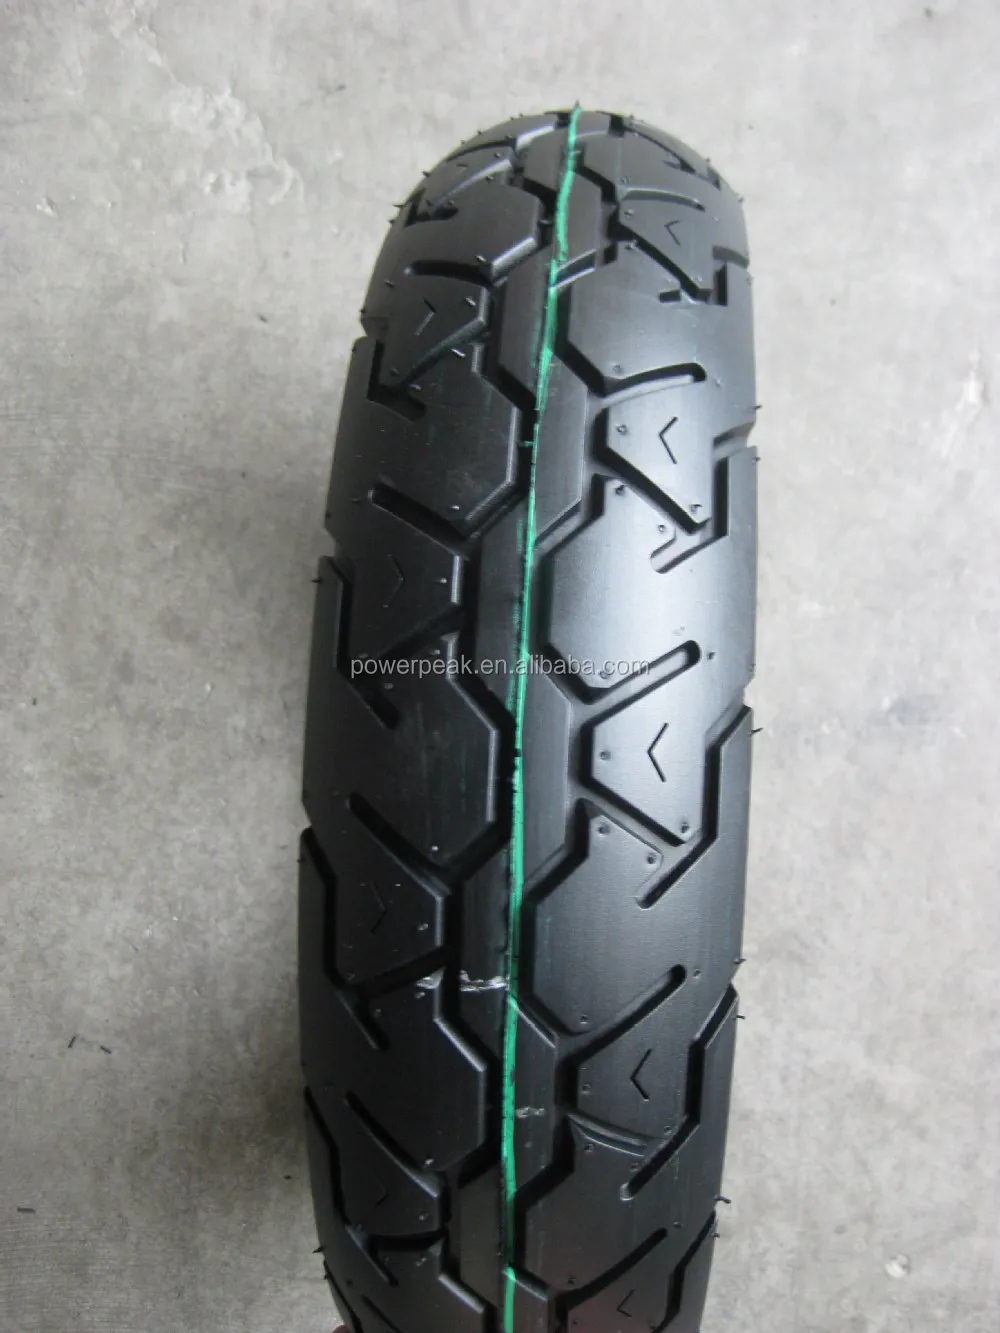 90 90 10 Tl 100 90 10 Cheng Shin Motorcycle Tyre 90 90 10 100 90 10 Buy Motorcycle Tyre 90 90 10 Motorcycle Tyre 100 90 10 90 90 10 Tyre Product On Alibaba Com